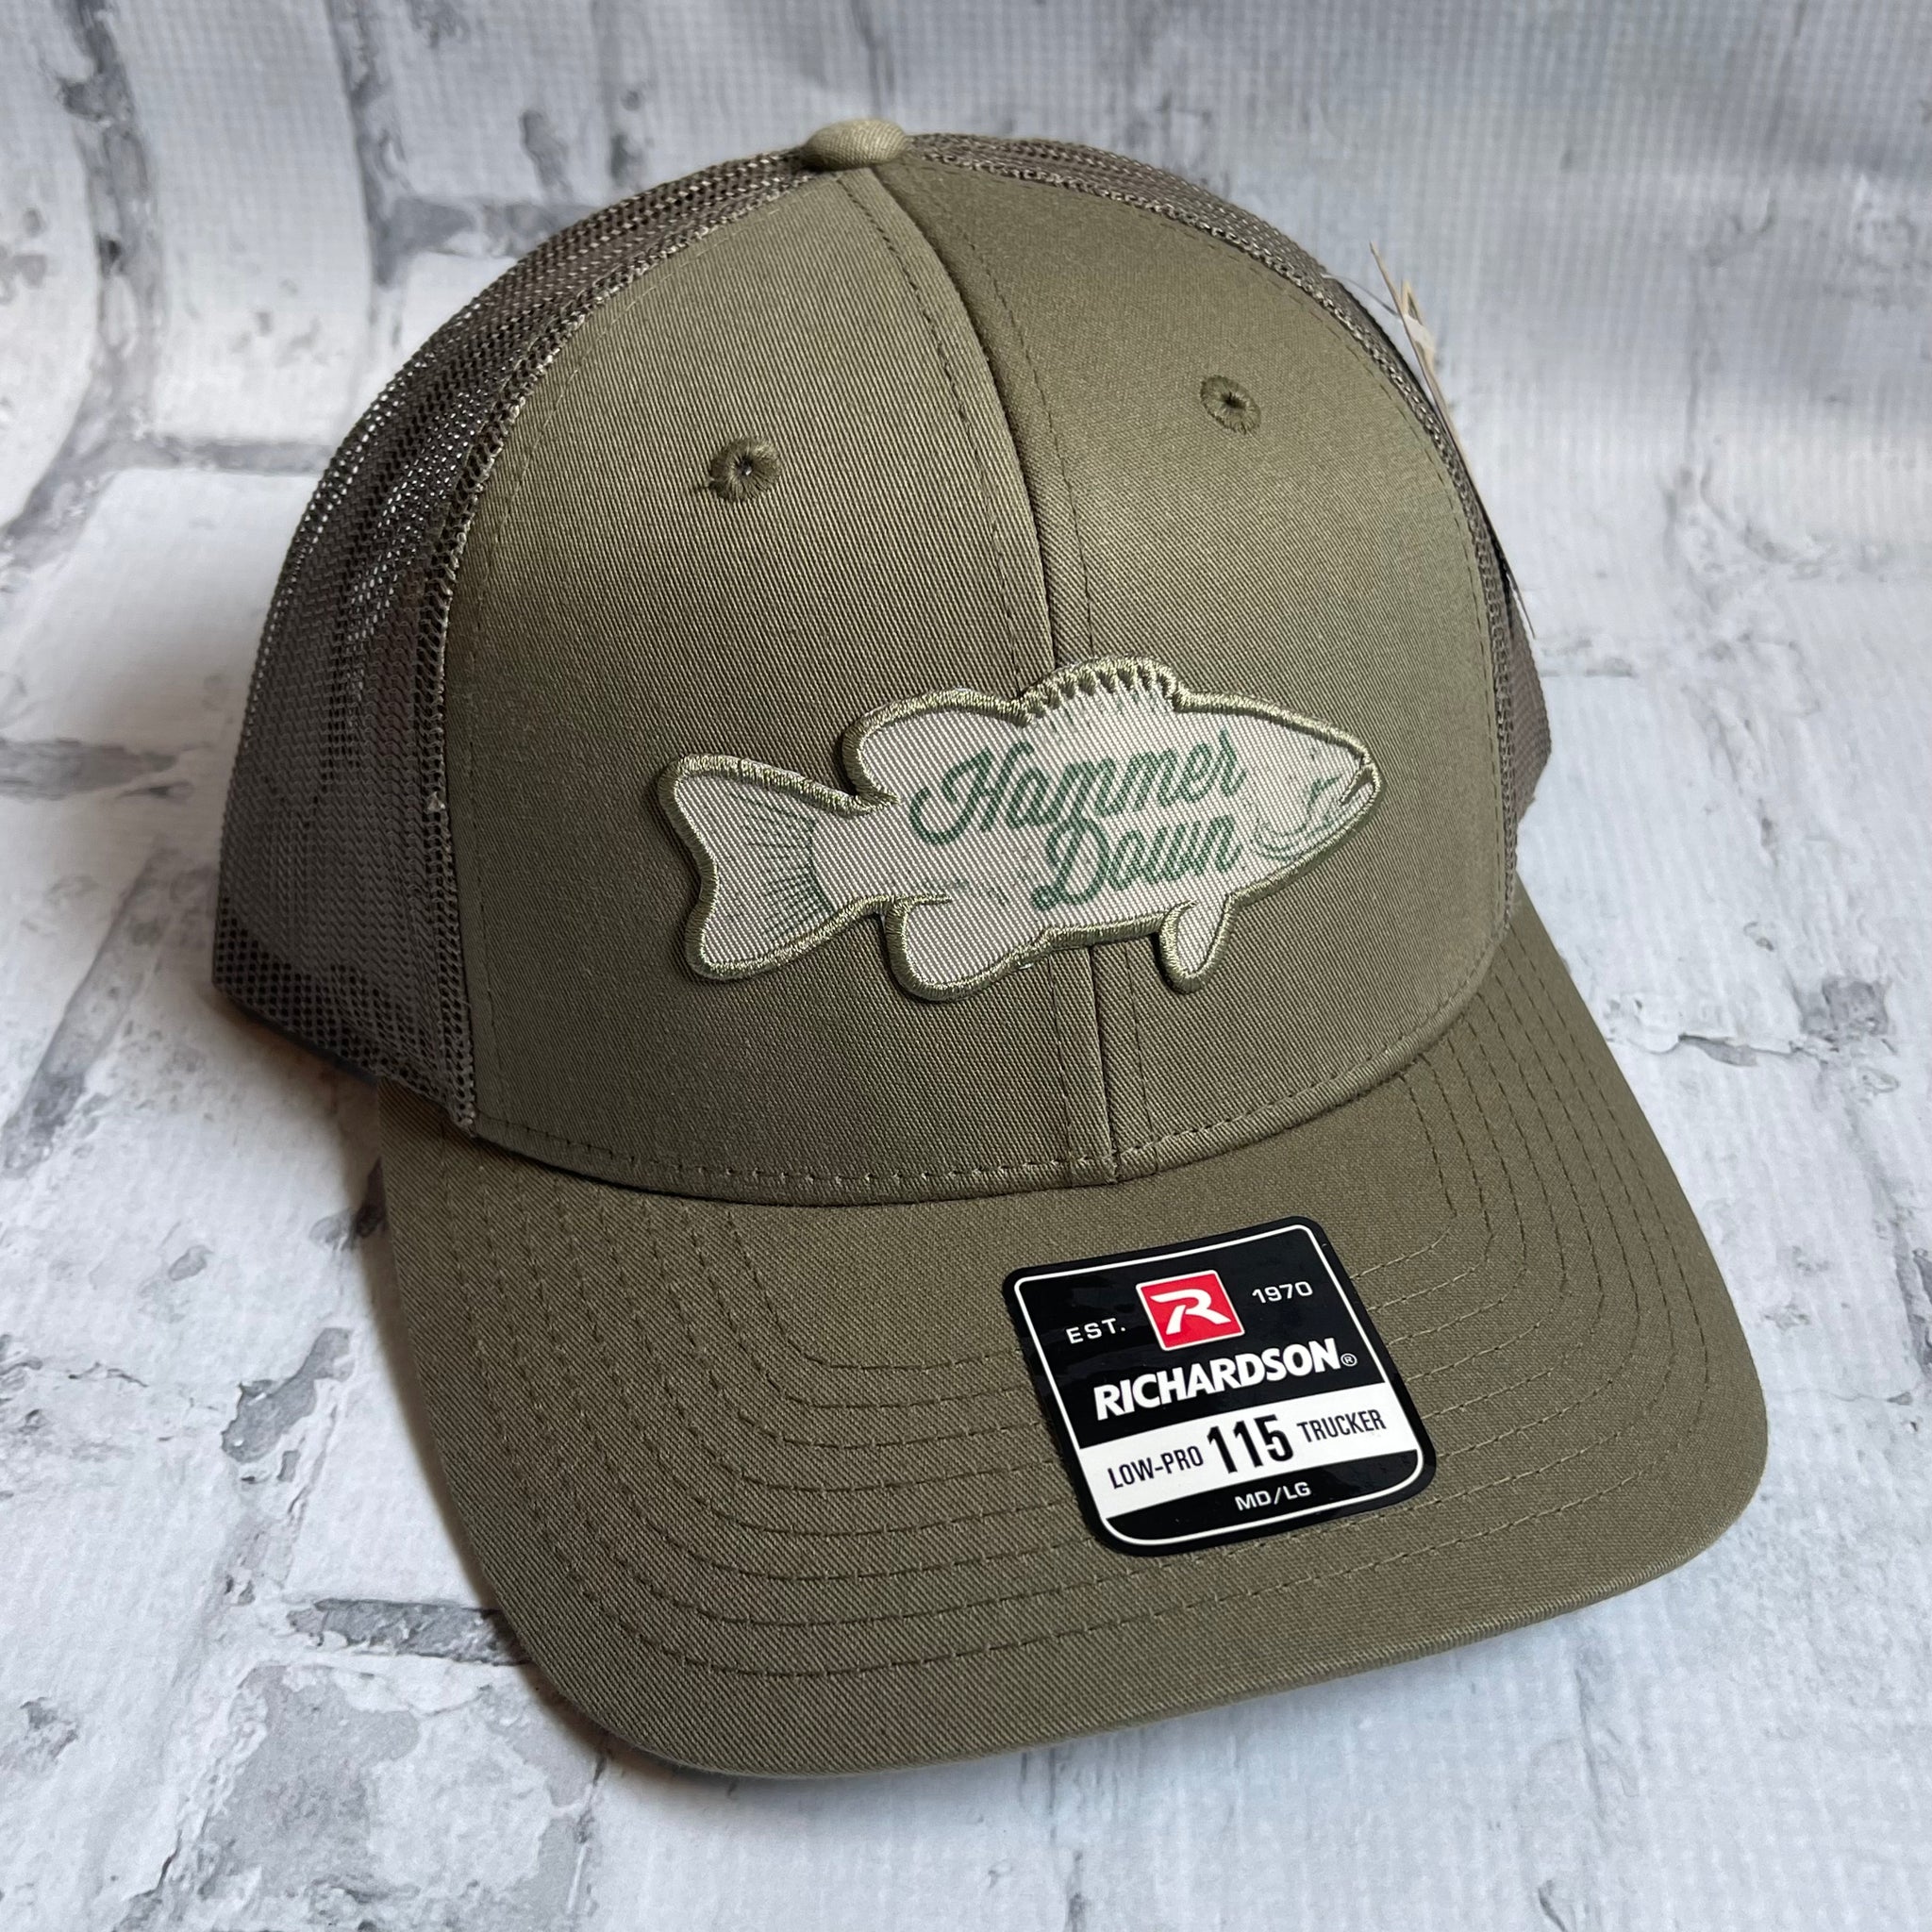 Hammer Down "Trout" Hat - Loden with Woven Patch - Southern Charm "Shop The Charm"